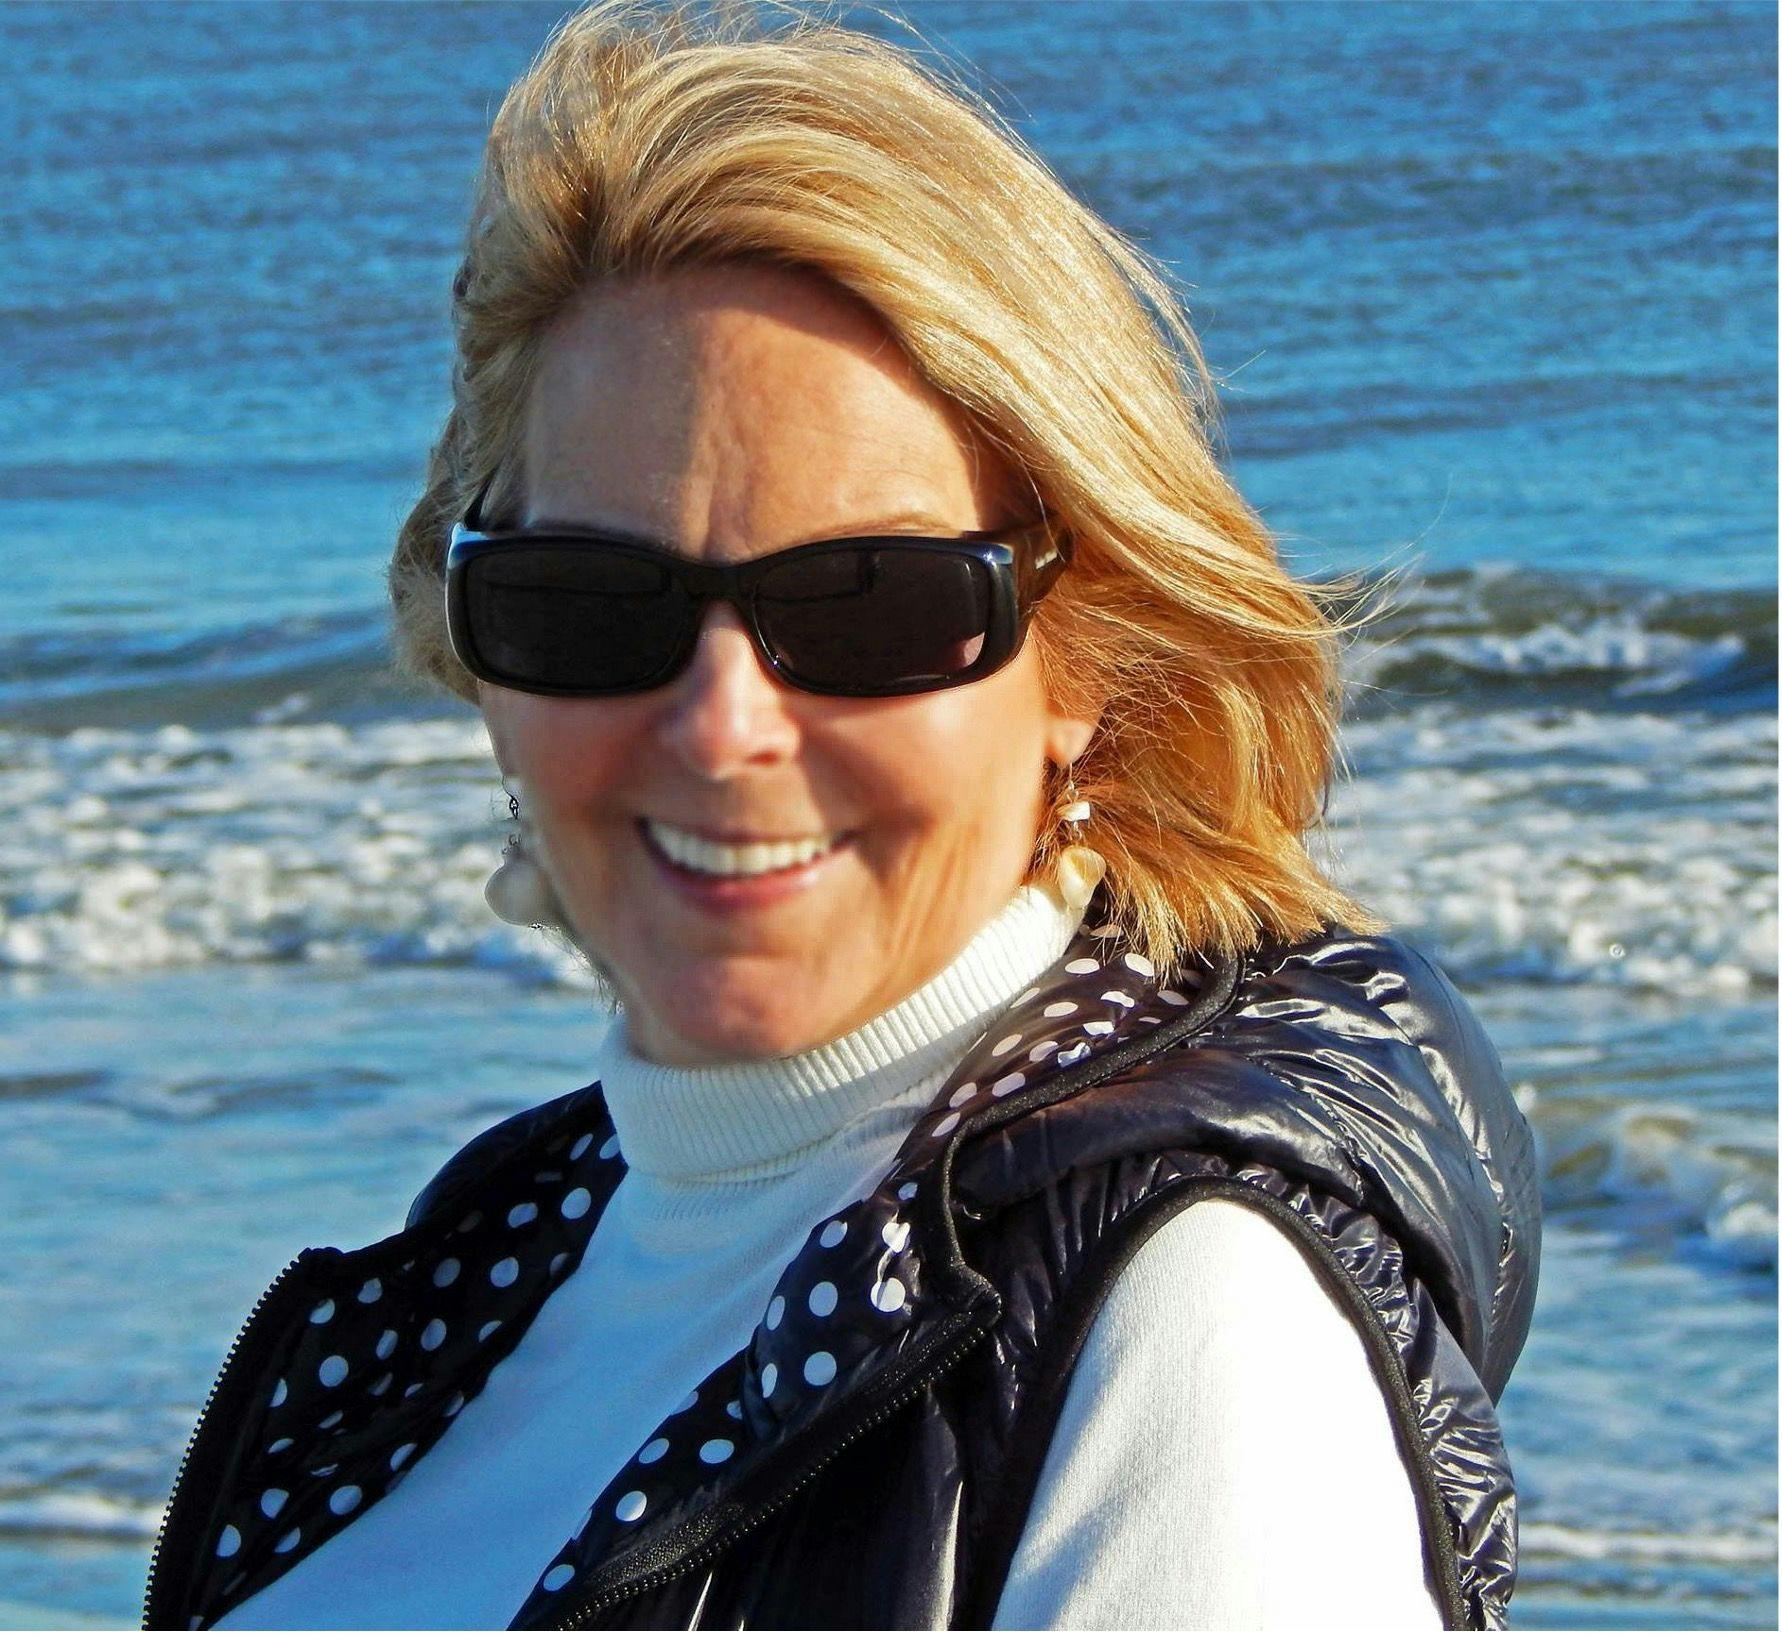 Penny Isop wearing sunglasses and smiling, with the ocean in the background